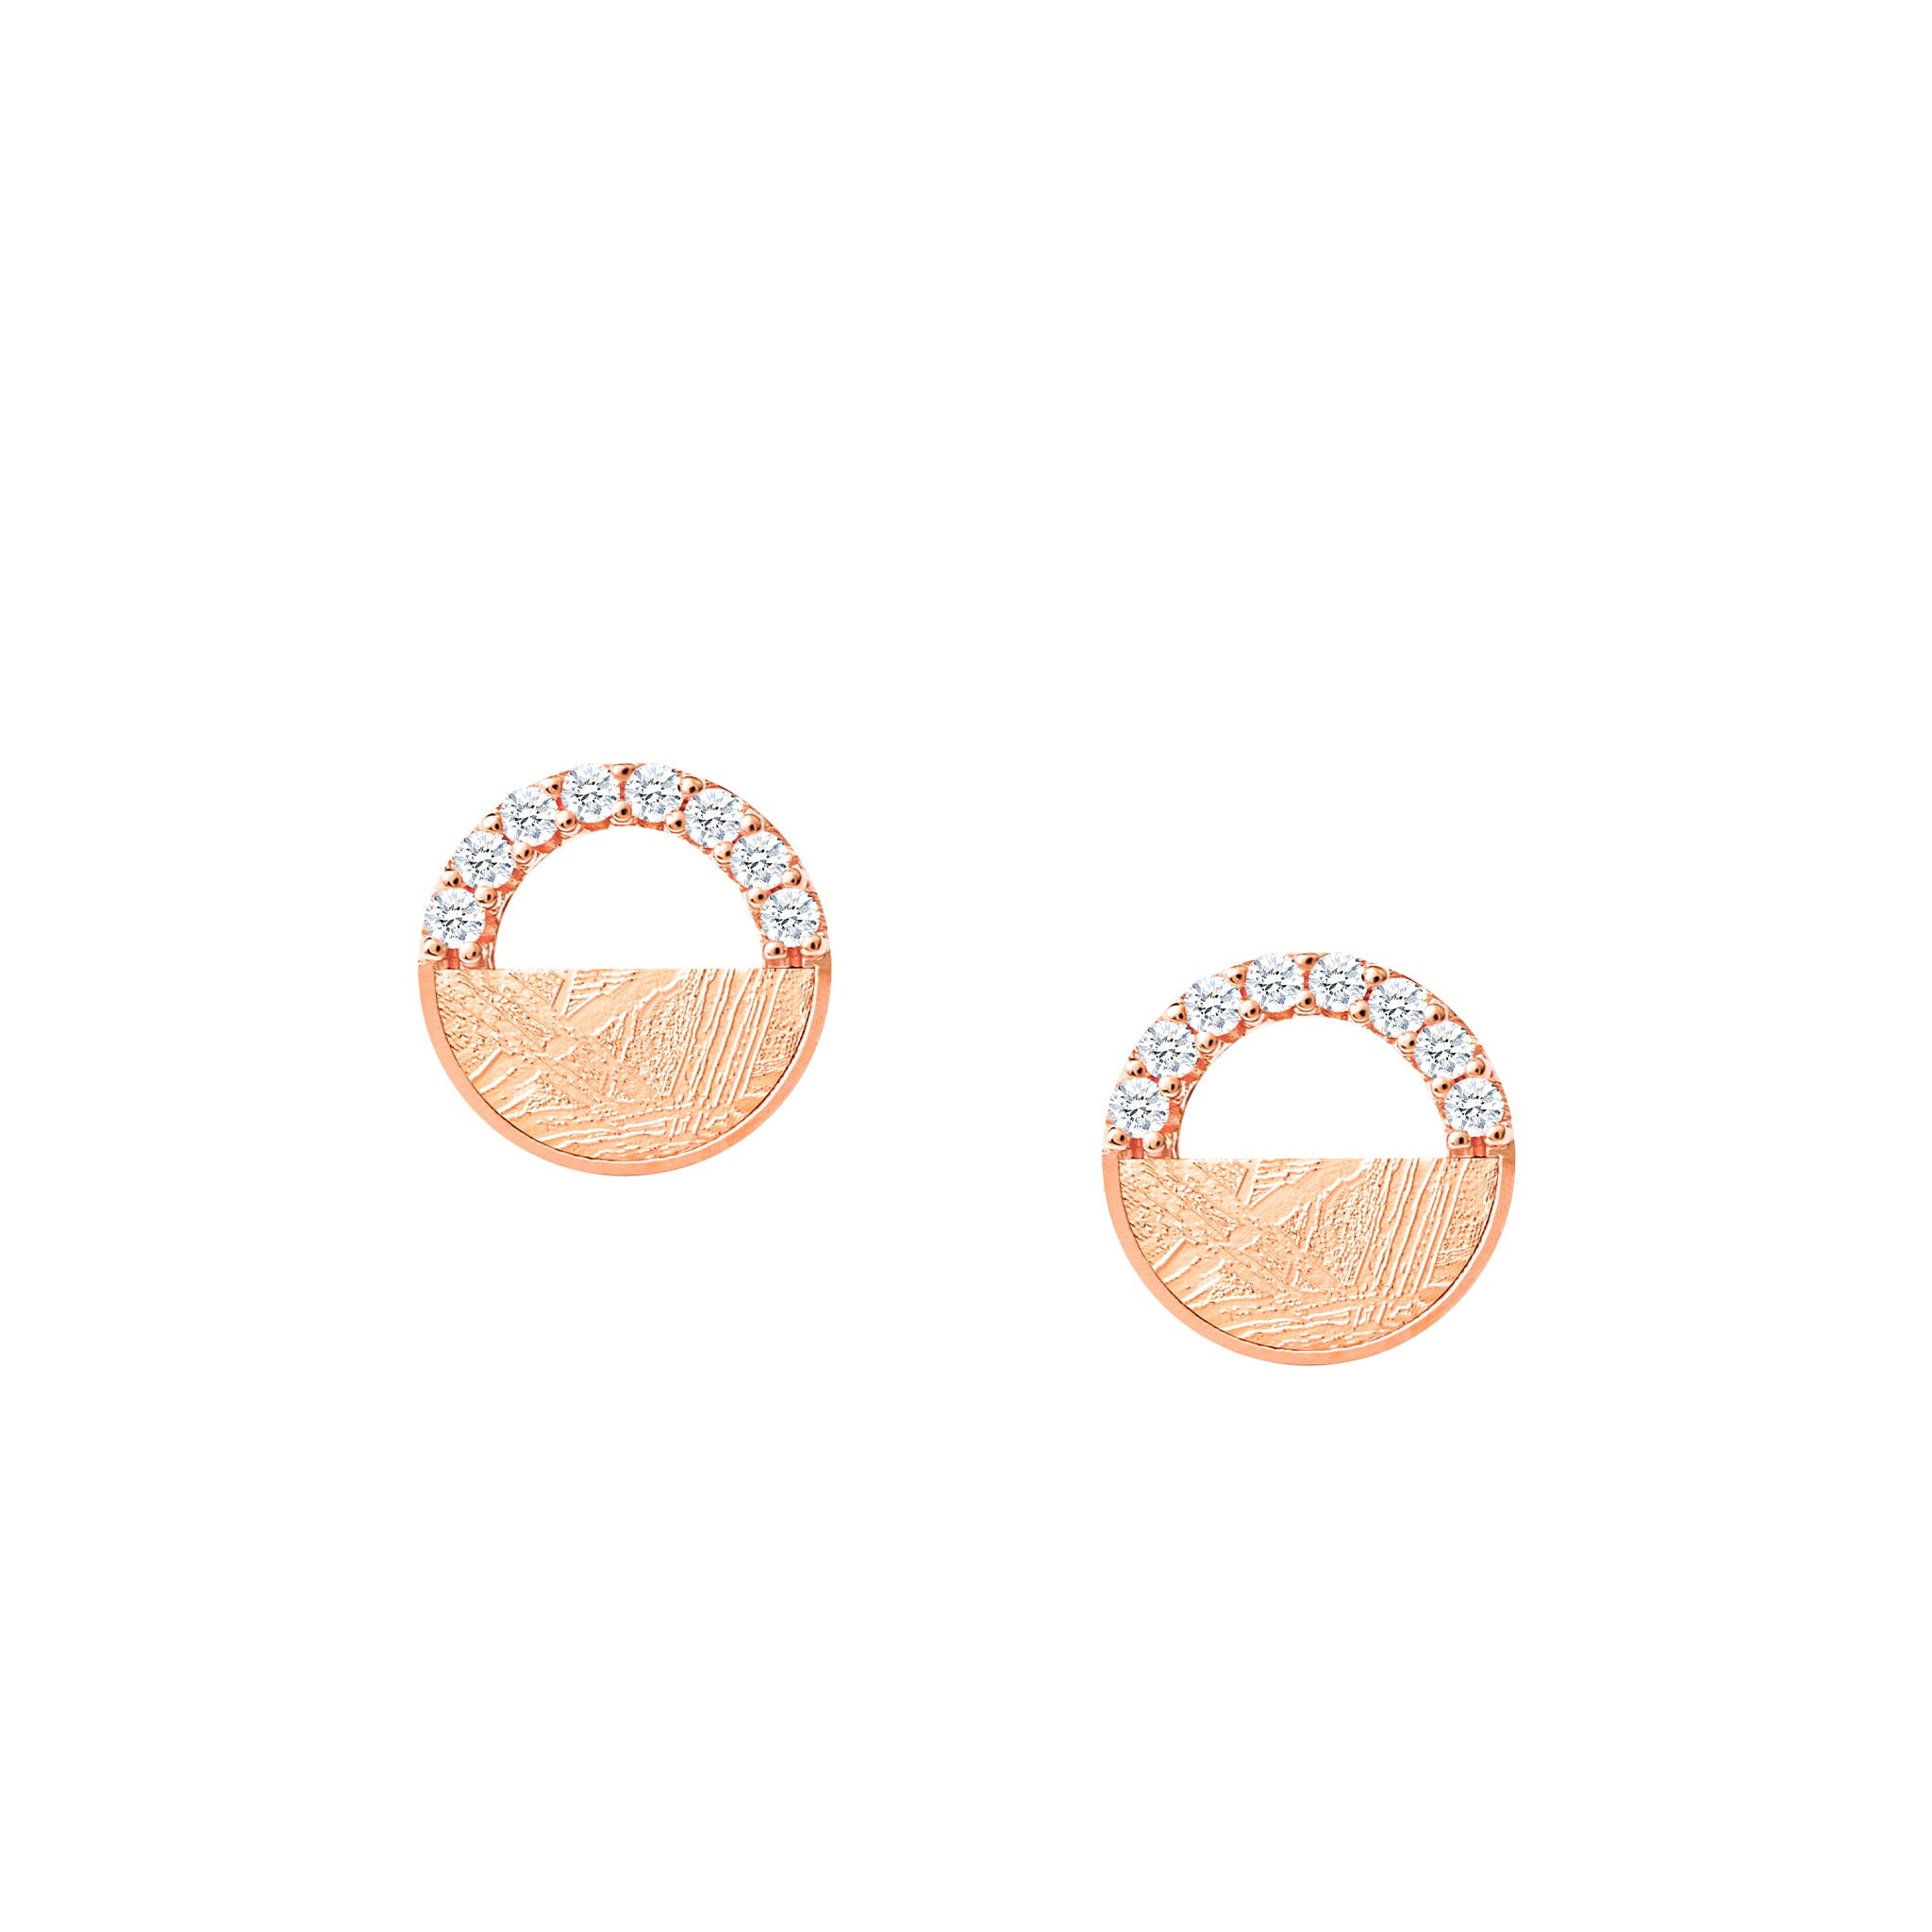 Women's Starry Night Studs with Meteorite Earrings AWNL Rose Gold 